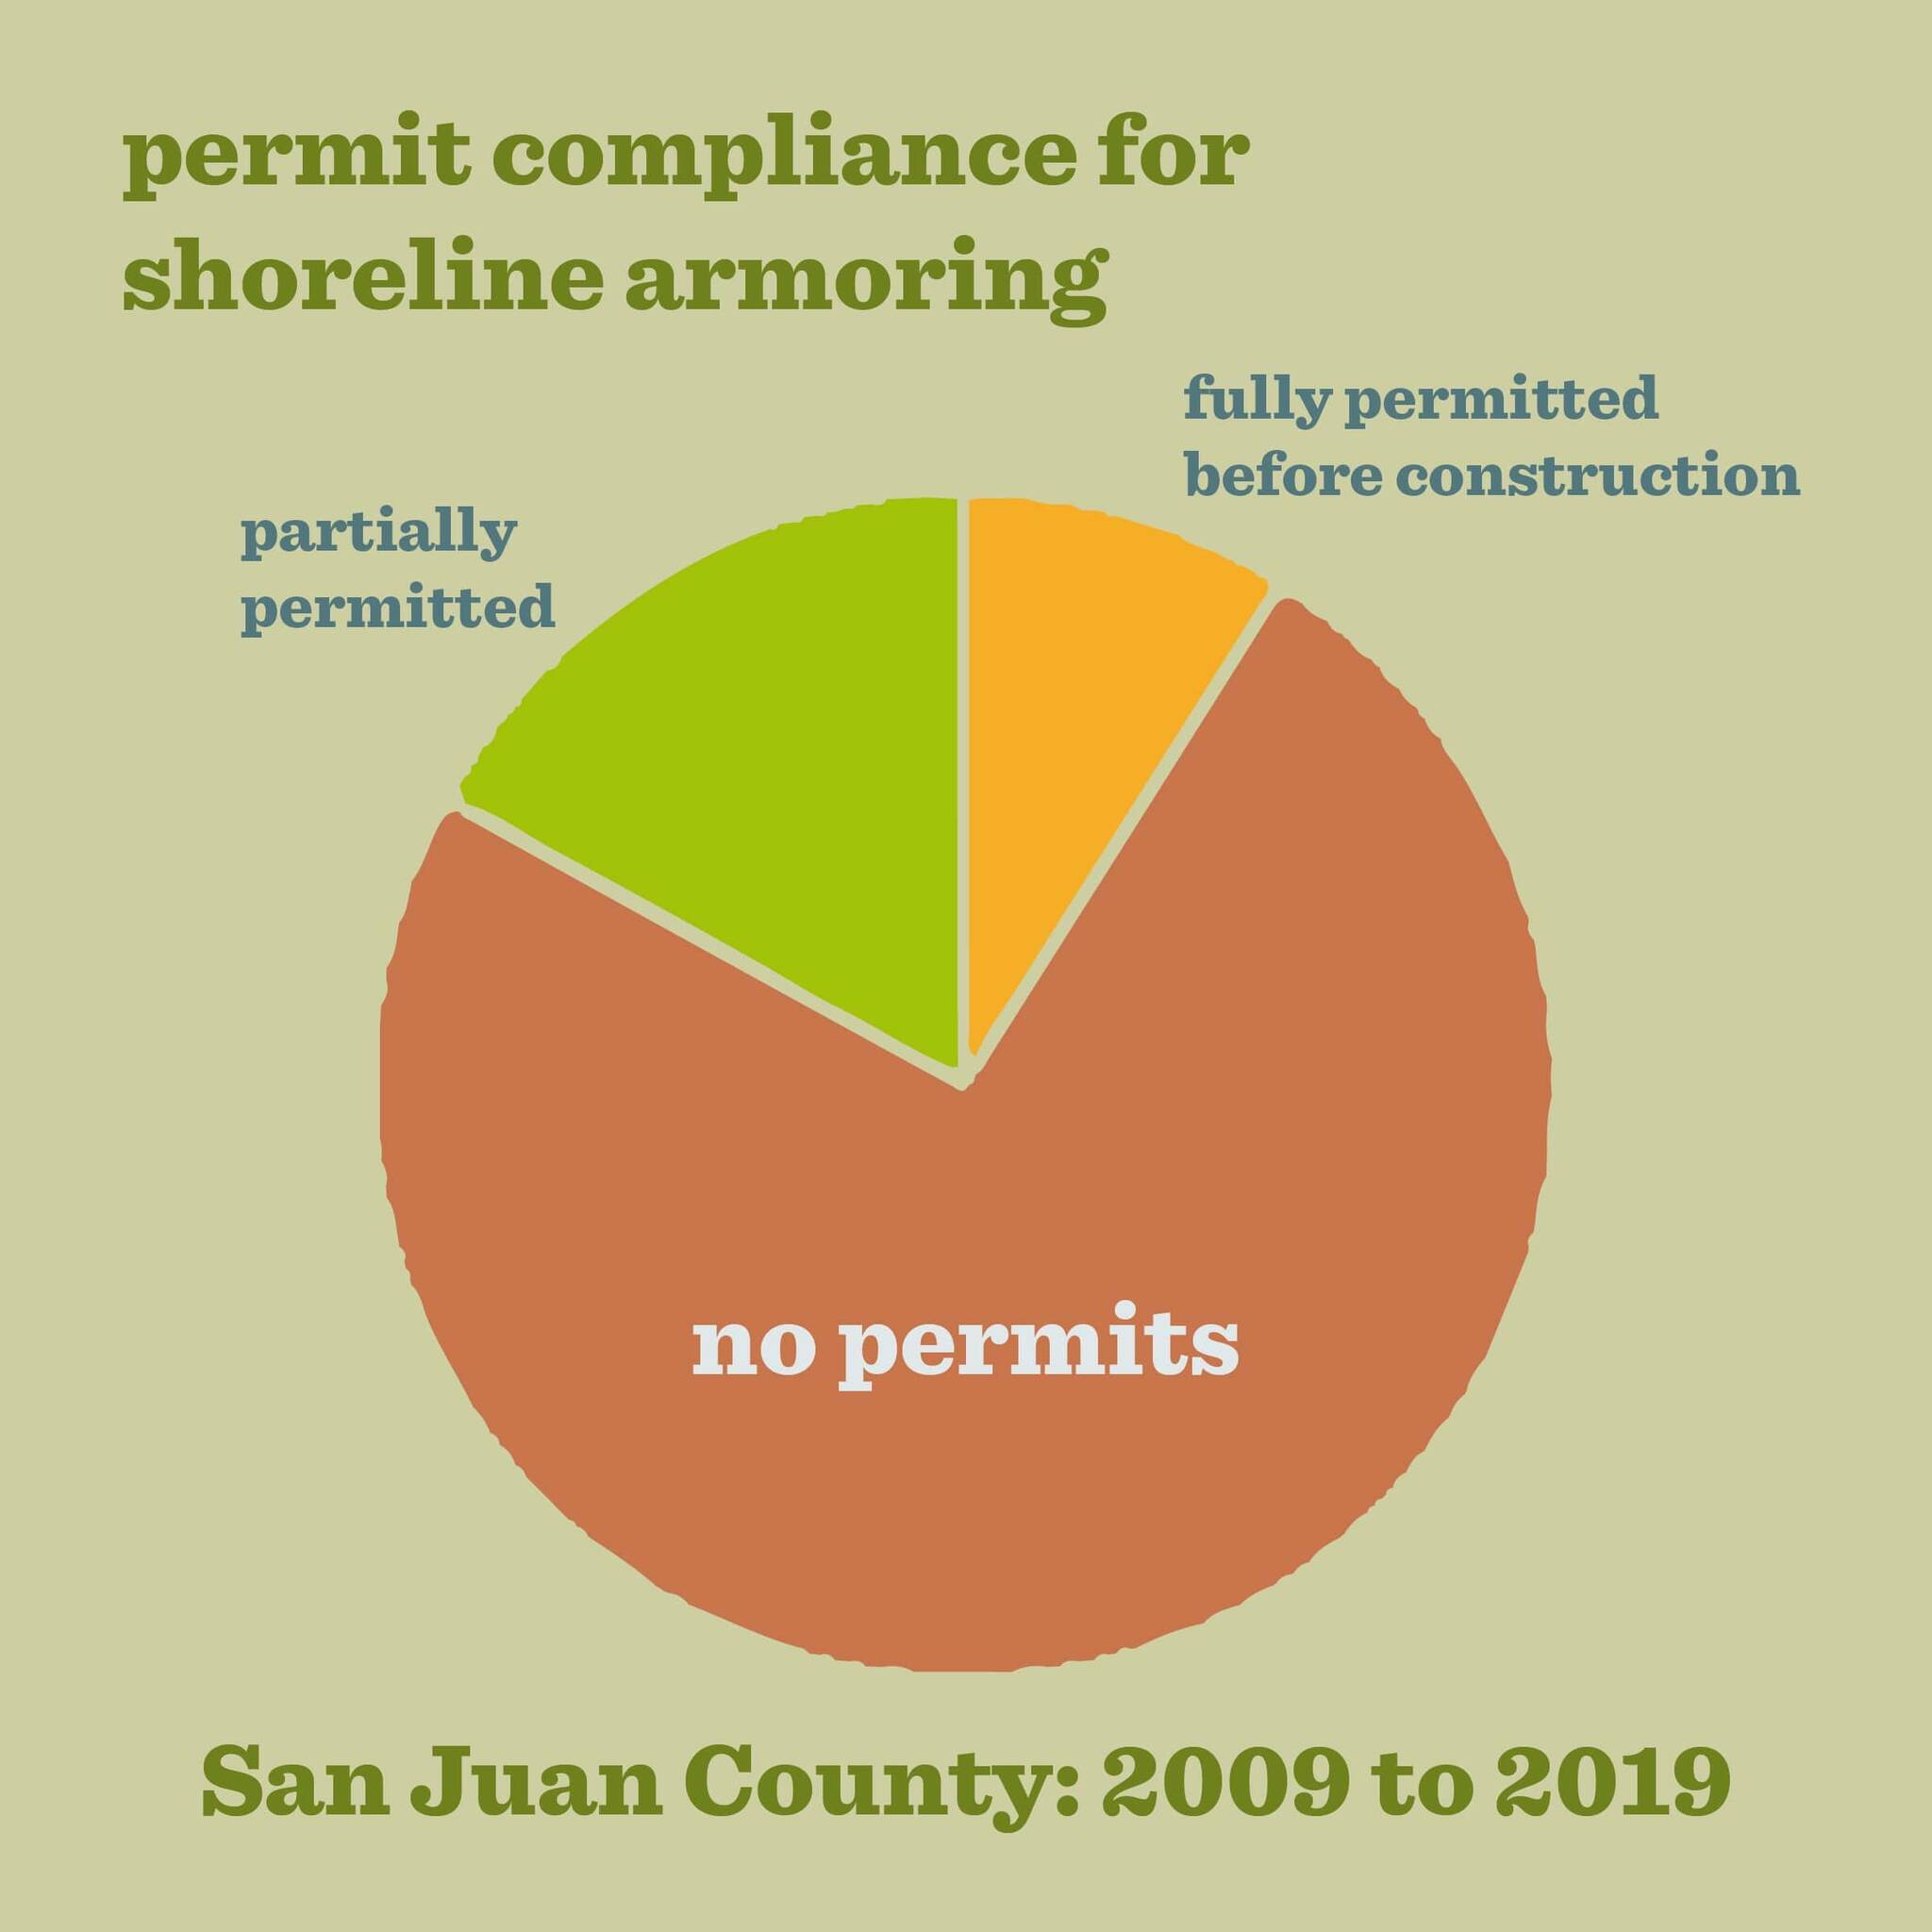 Friends of the San Juans/Contributed images
Graphs illustrating permit compliance and armoring changes.